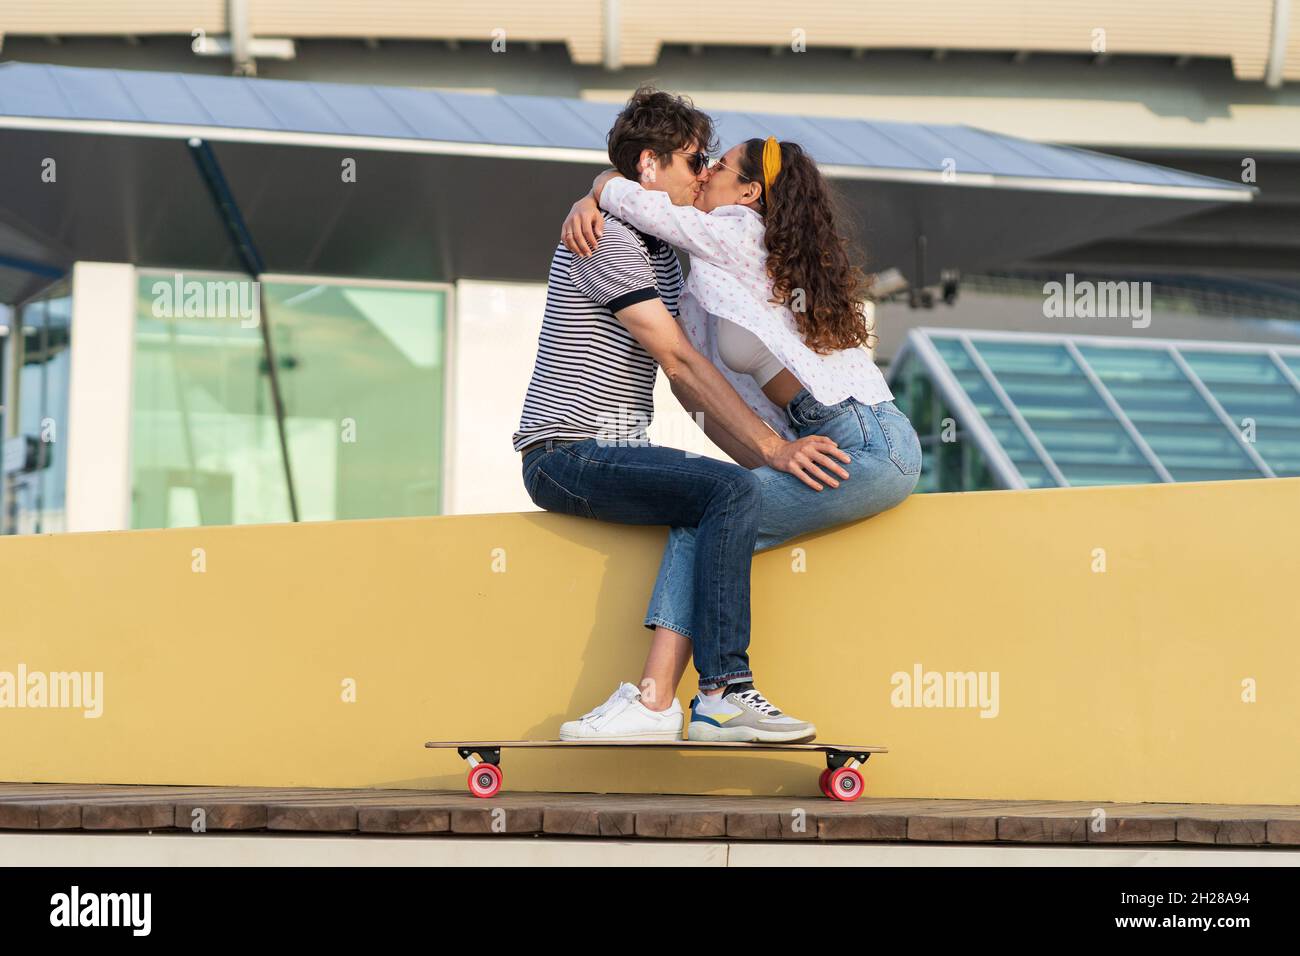 Stylish couple kissing sitting in skatepark. Young cute longboarders man and woman in love cuddling Stock Photo